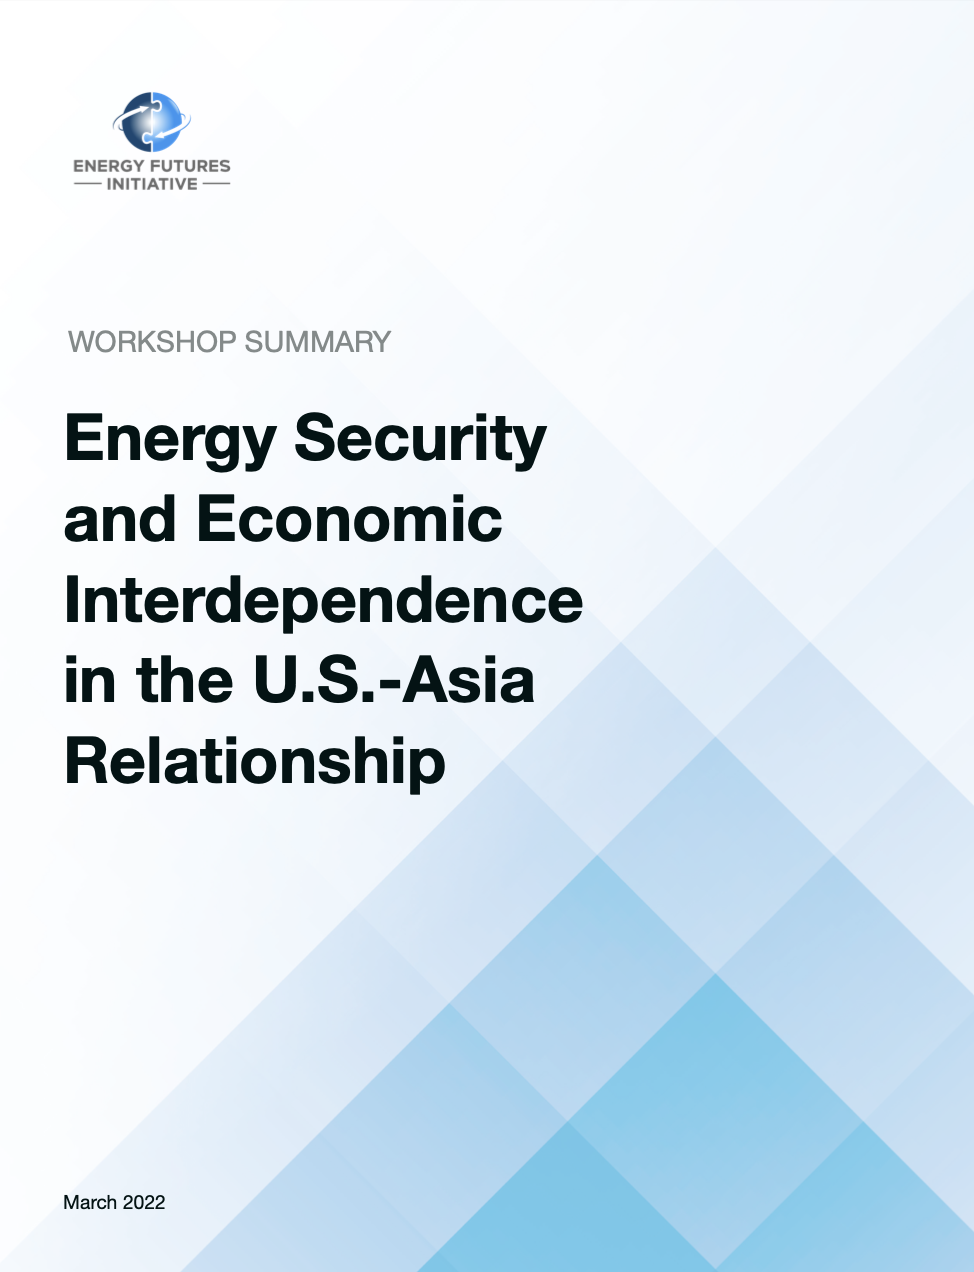 Image of Report Cover: Energy Security and Economic Interdependence in the U.S. - Asia Relationship